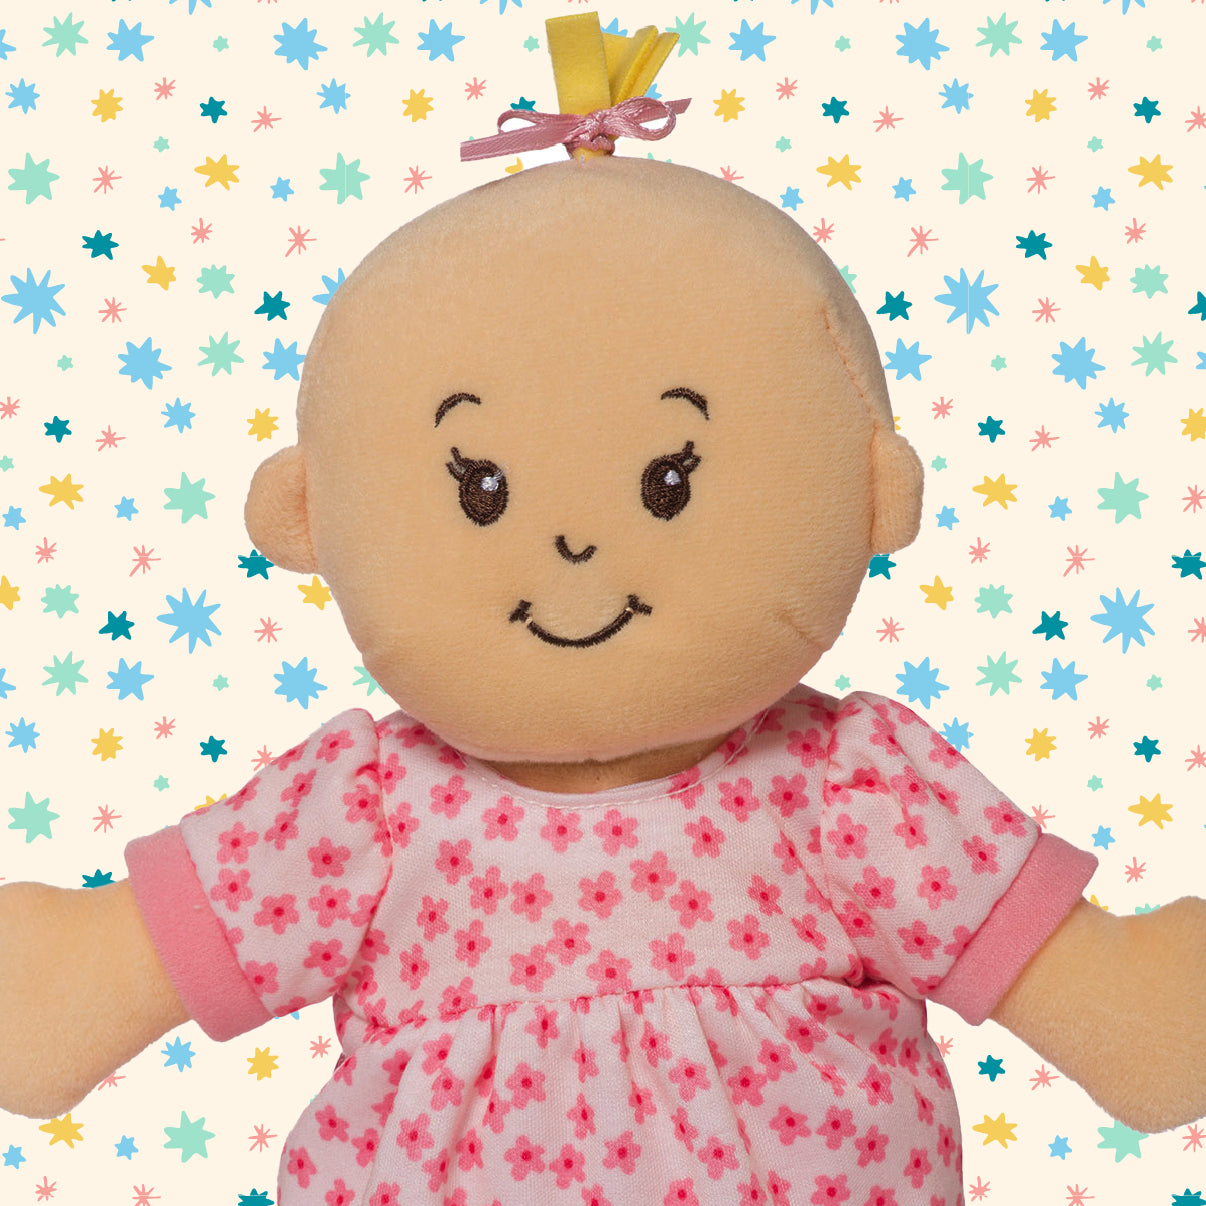 Stella doll with blonde hair, wearing a pink dress, sitting on a pattern background.